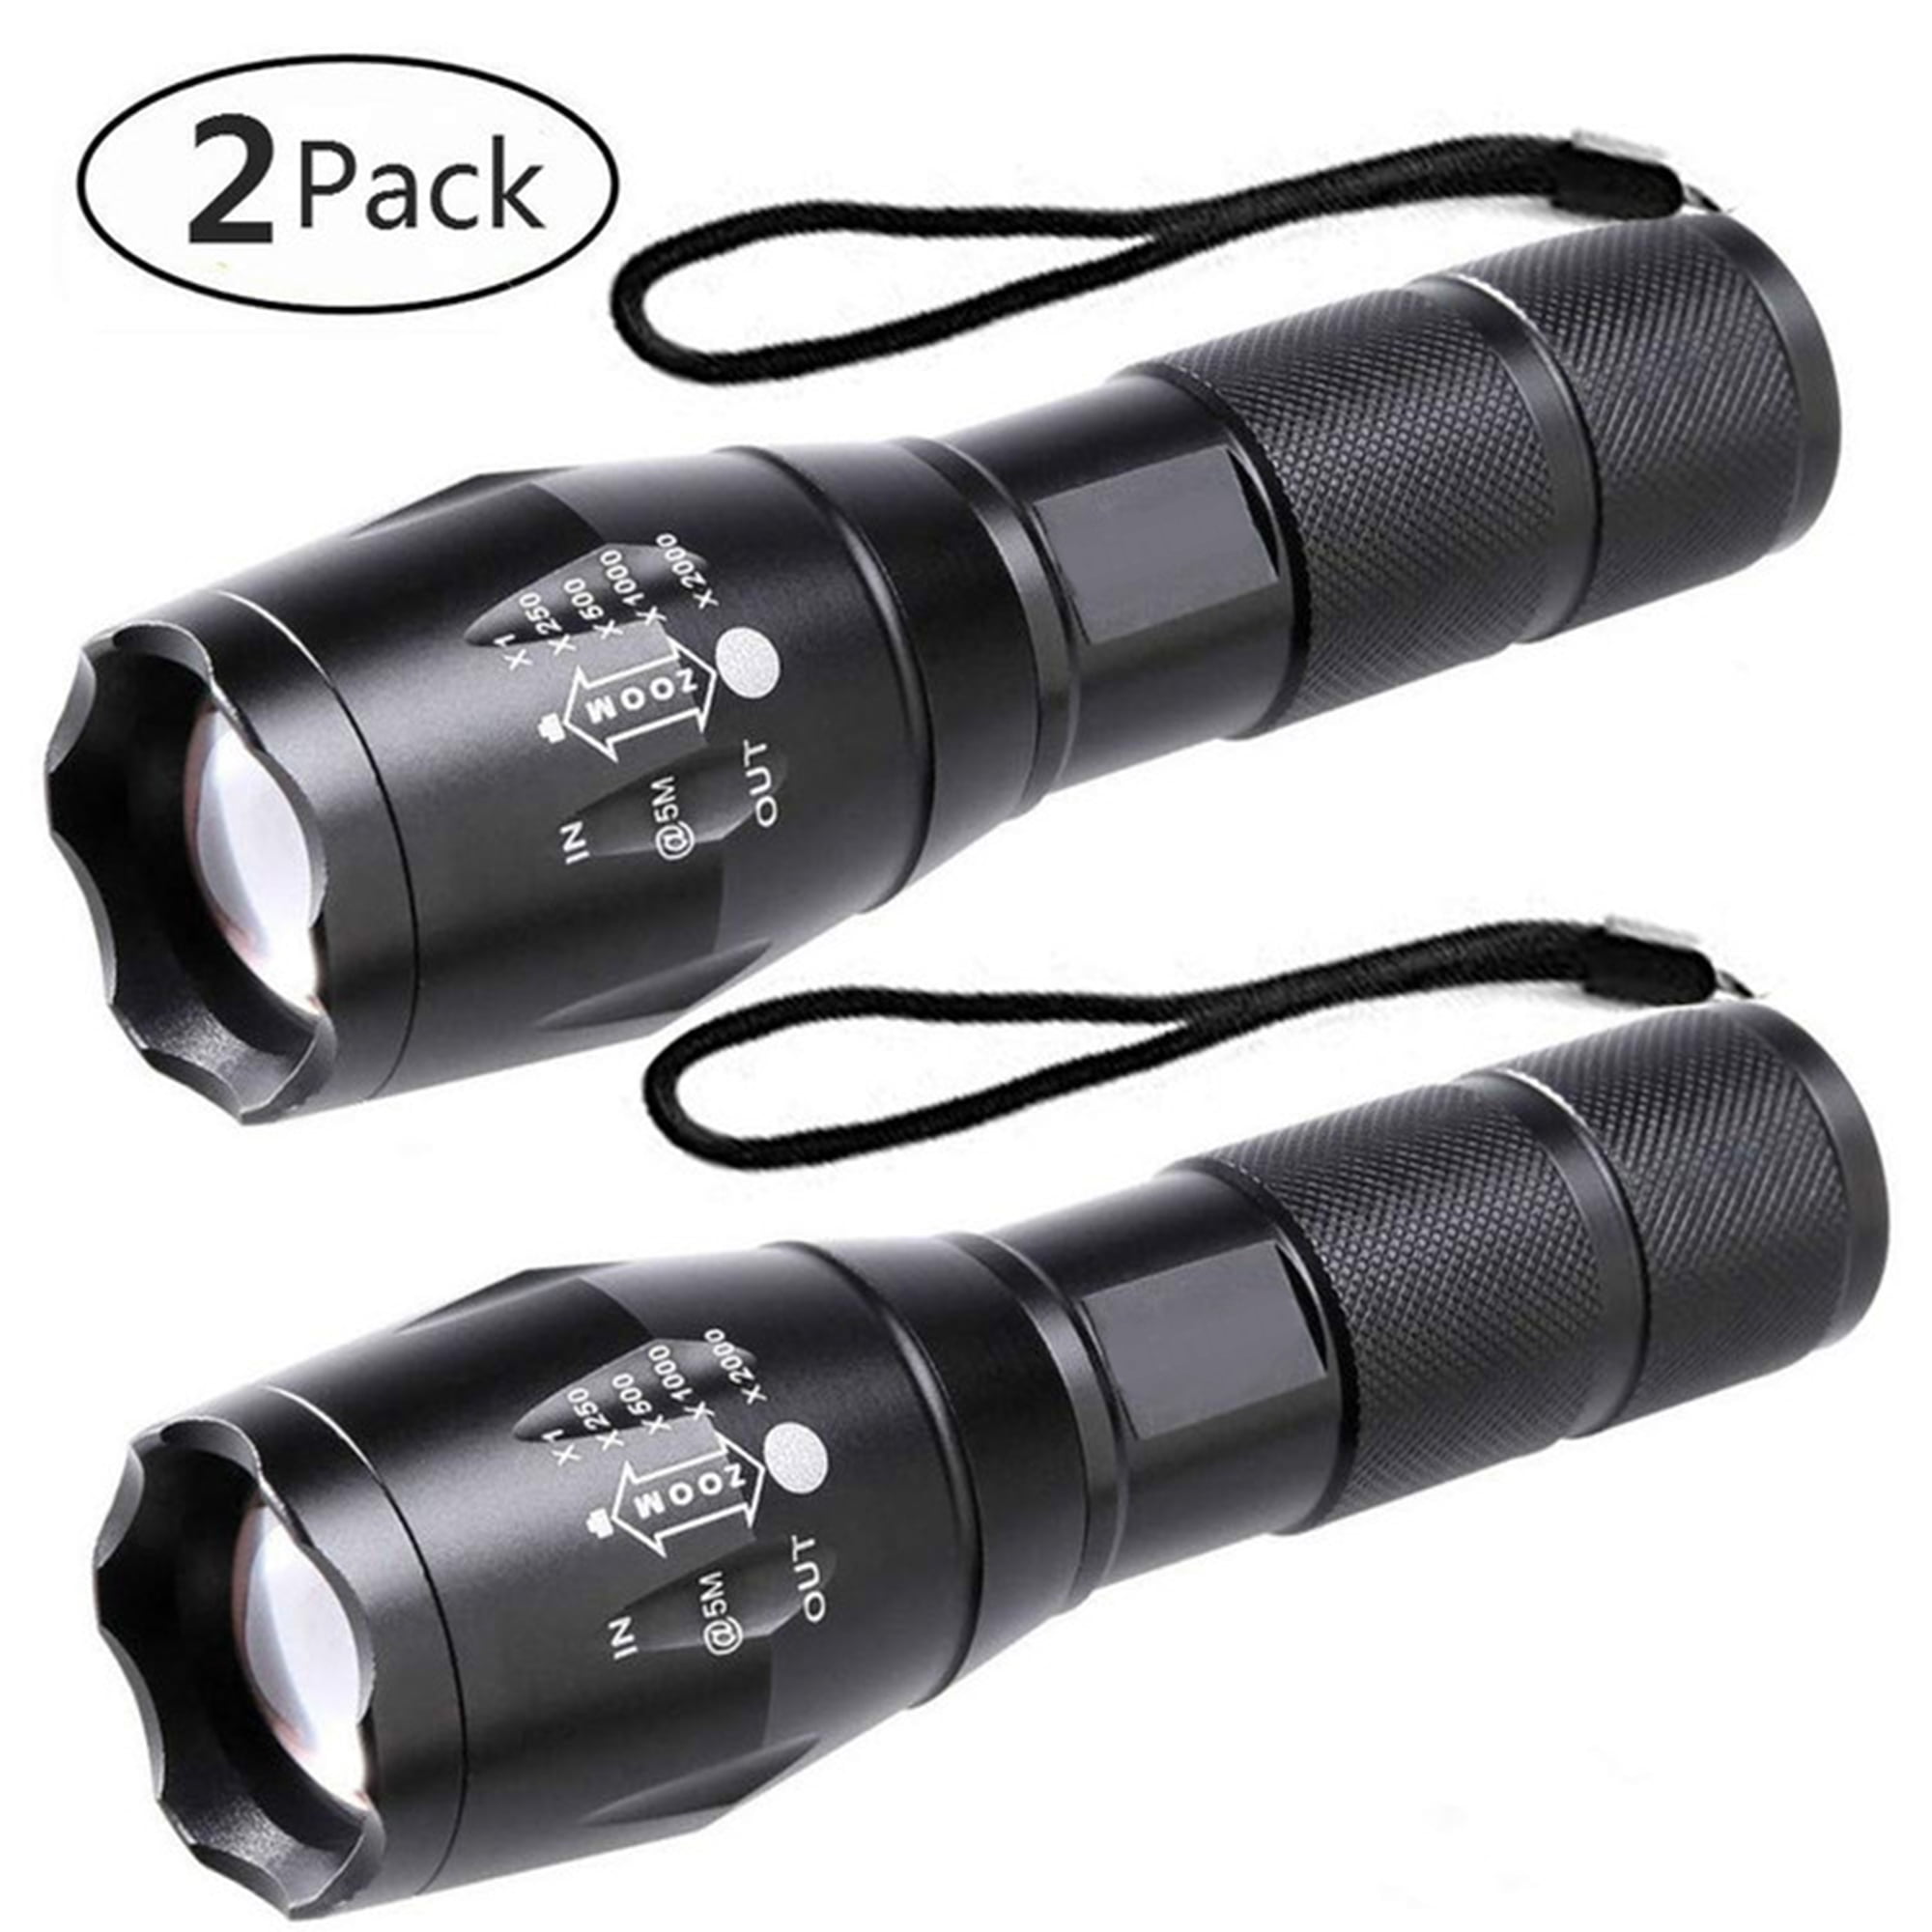 2 Pcs LED Tactical Flashlight 1600 LM Ultra Bright CREE XML T6 LED Taclight As Seen On Tv with 5 Light Modes and Adjustable Focus for Emergency Camping Hiking